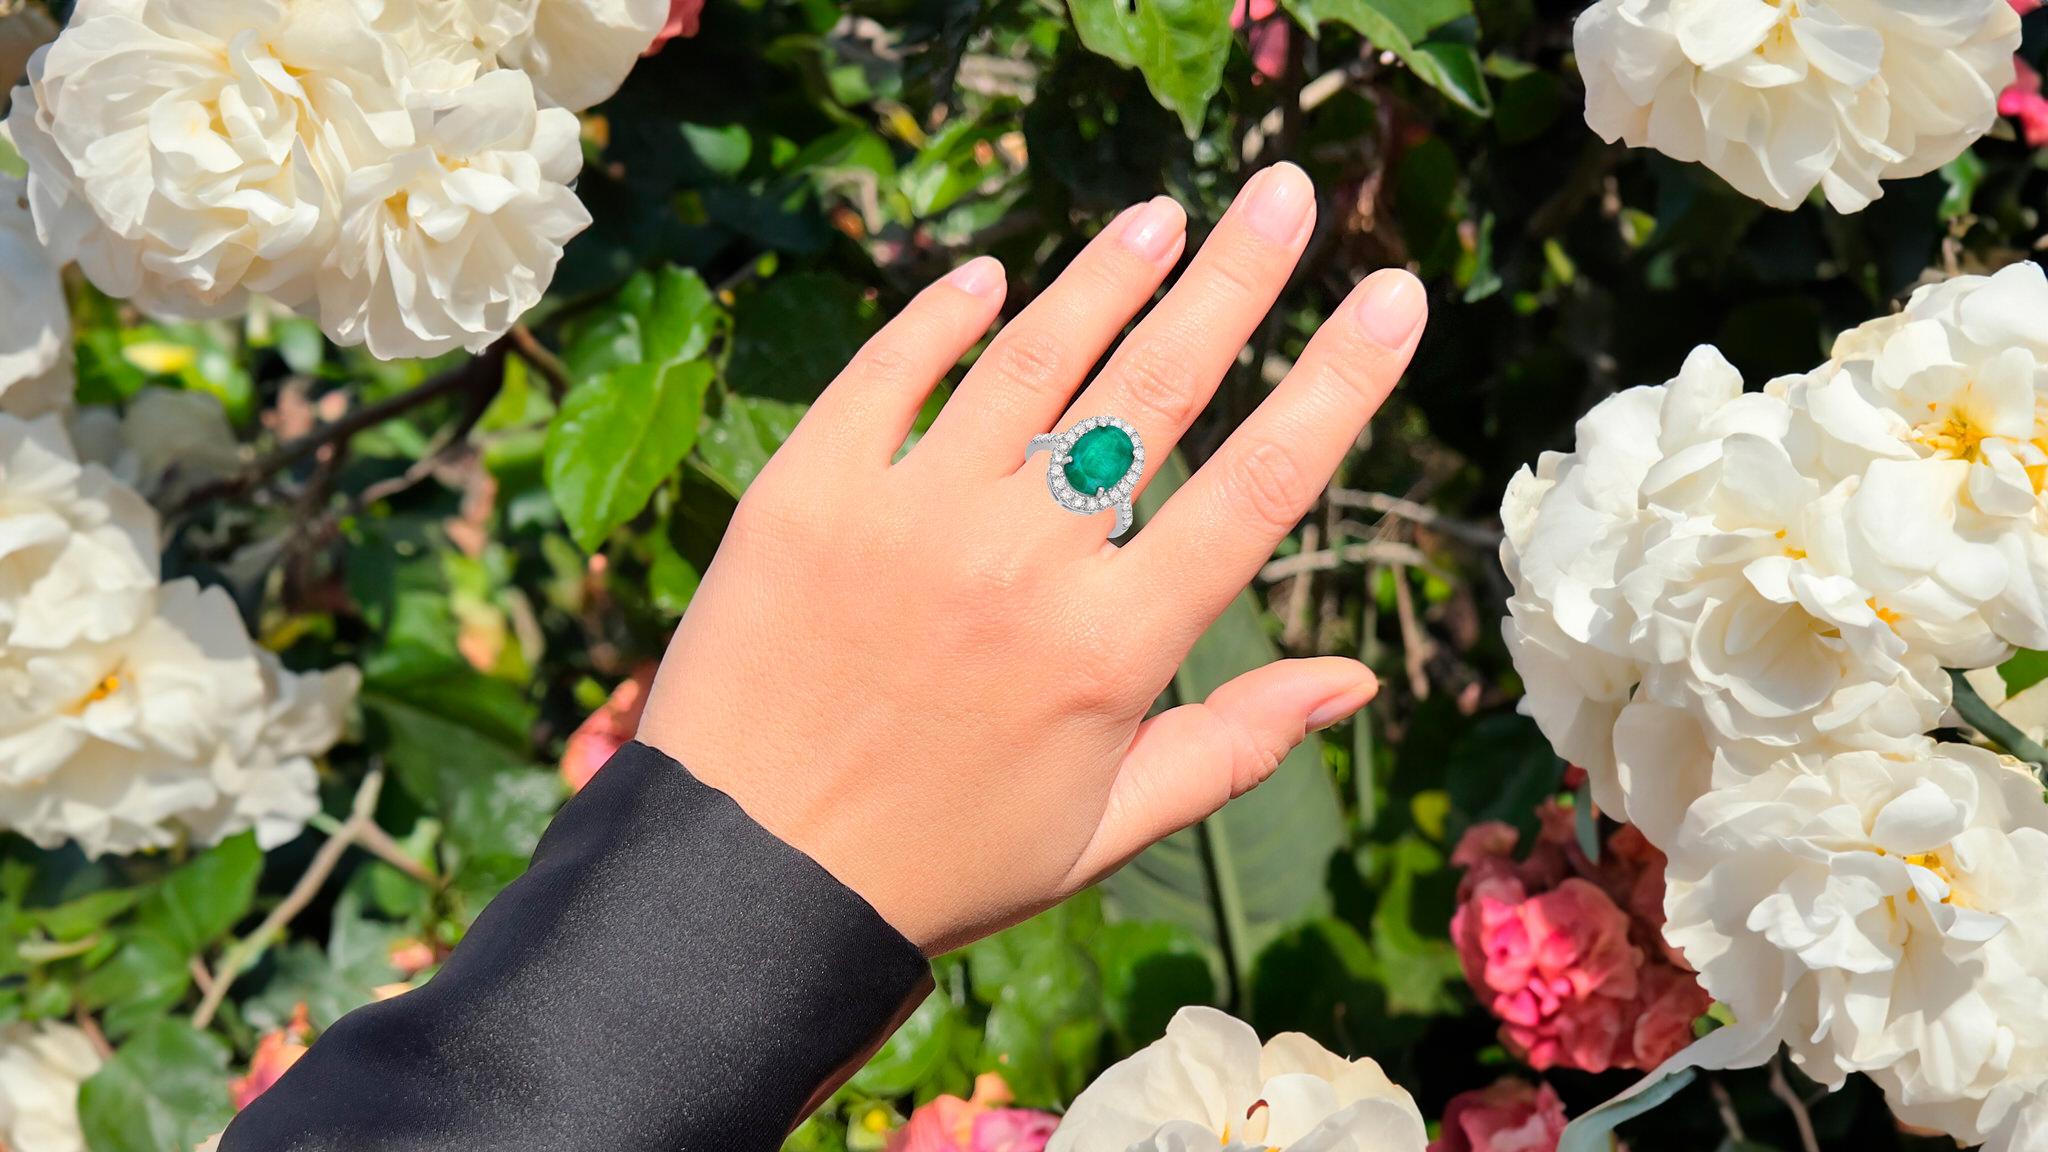 It comes with the Gemological Appraisal by GIA GG/AJP
All Gemstones are Natural
Emerald = 4.65 Carat
28 Round Diamonds = 0.84 Carats
Metal: Rhodium Plated Sterling Silver
Ring Size: 7.5* US
*It can be resized complimentary
